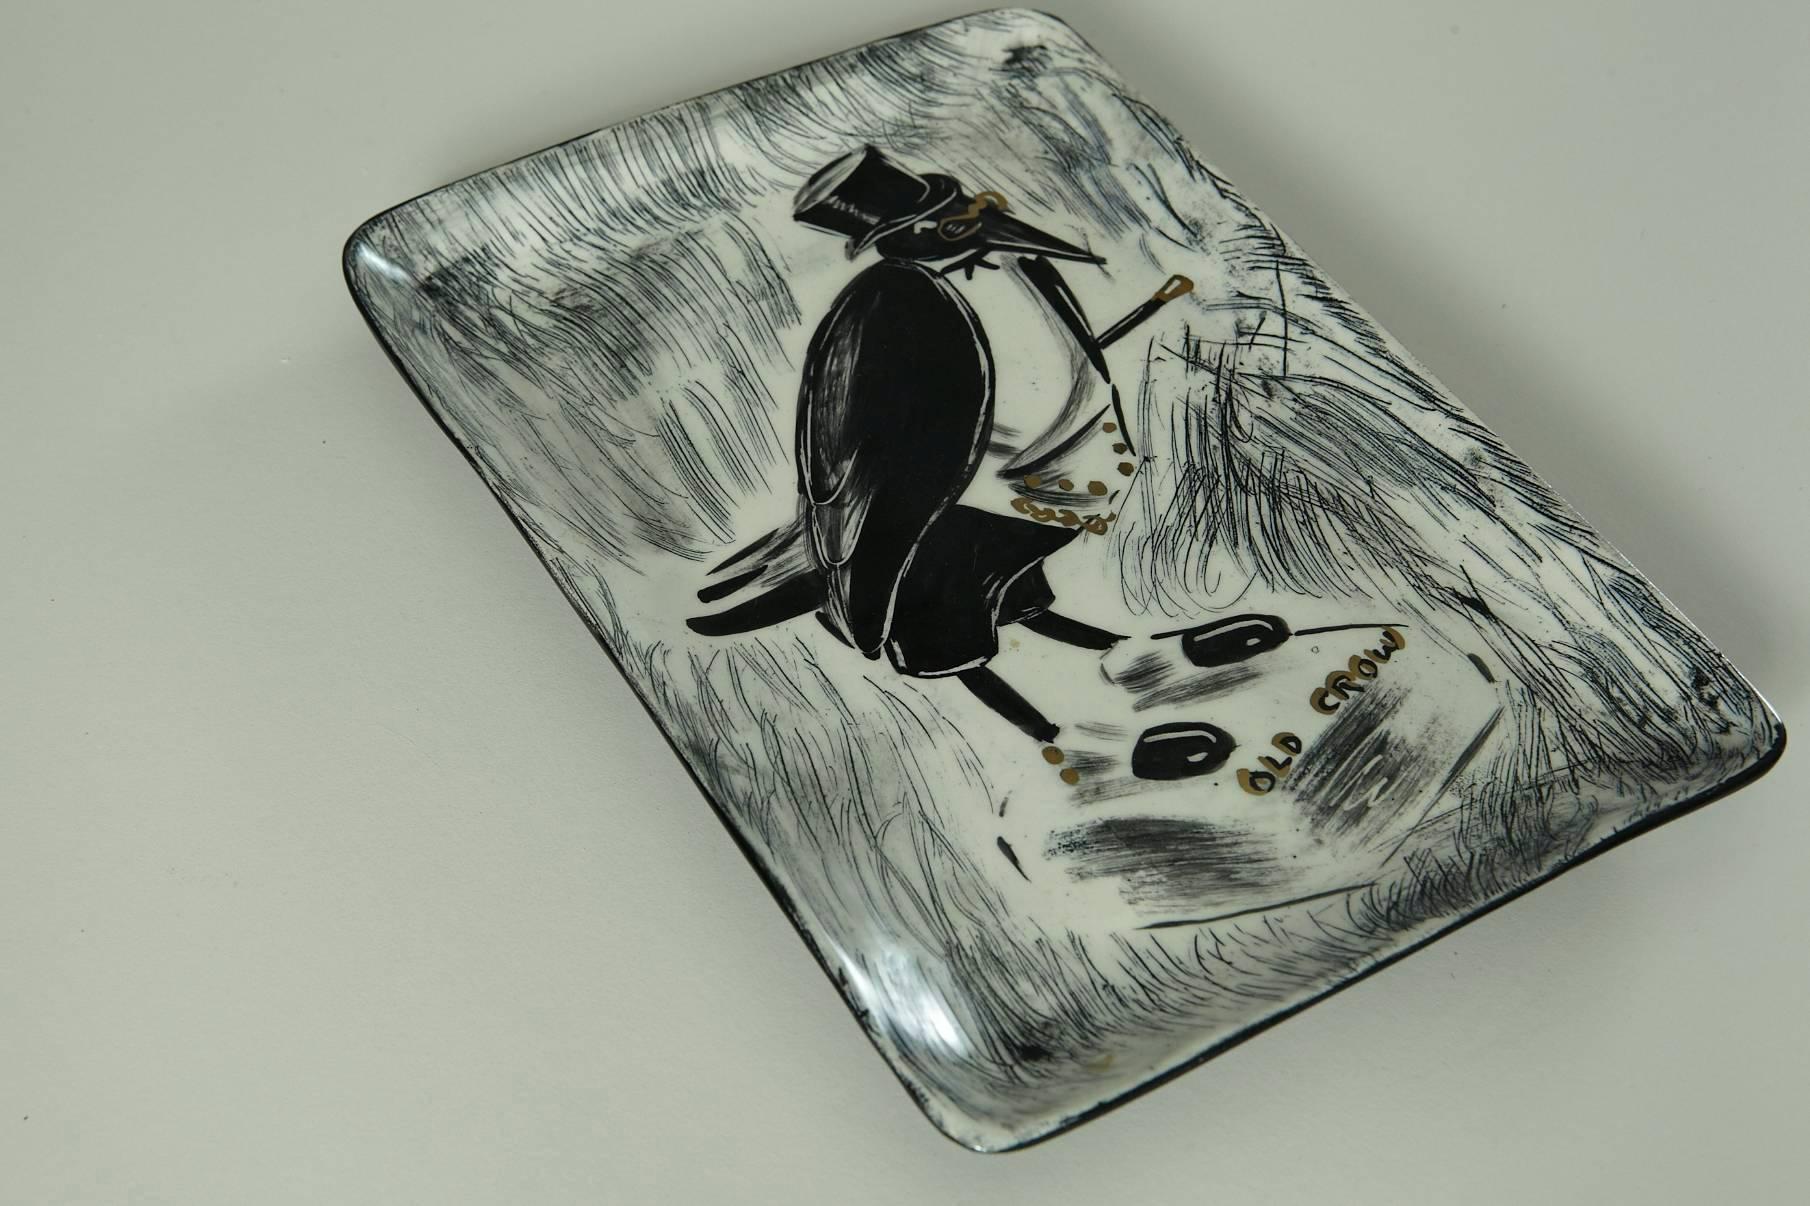 Rare ceramic piece by famous ceramicist Hedi Schoop, featuring the Old Crow Scotch advertising character. Beautiful black and white tray with some gold highlights.
About the artist:
Hedi Schoop was born in Switzerland and an accomplished dancer in